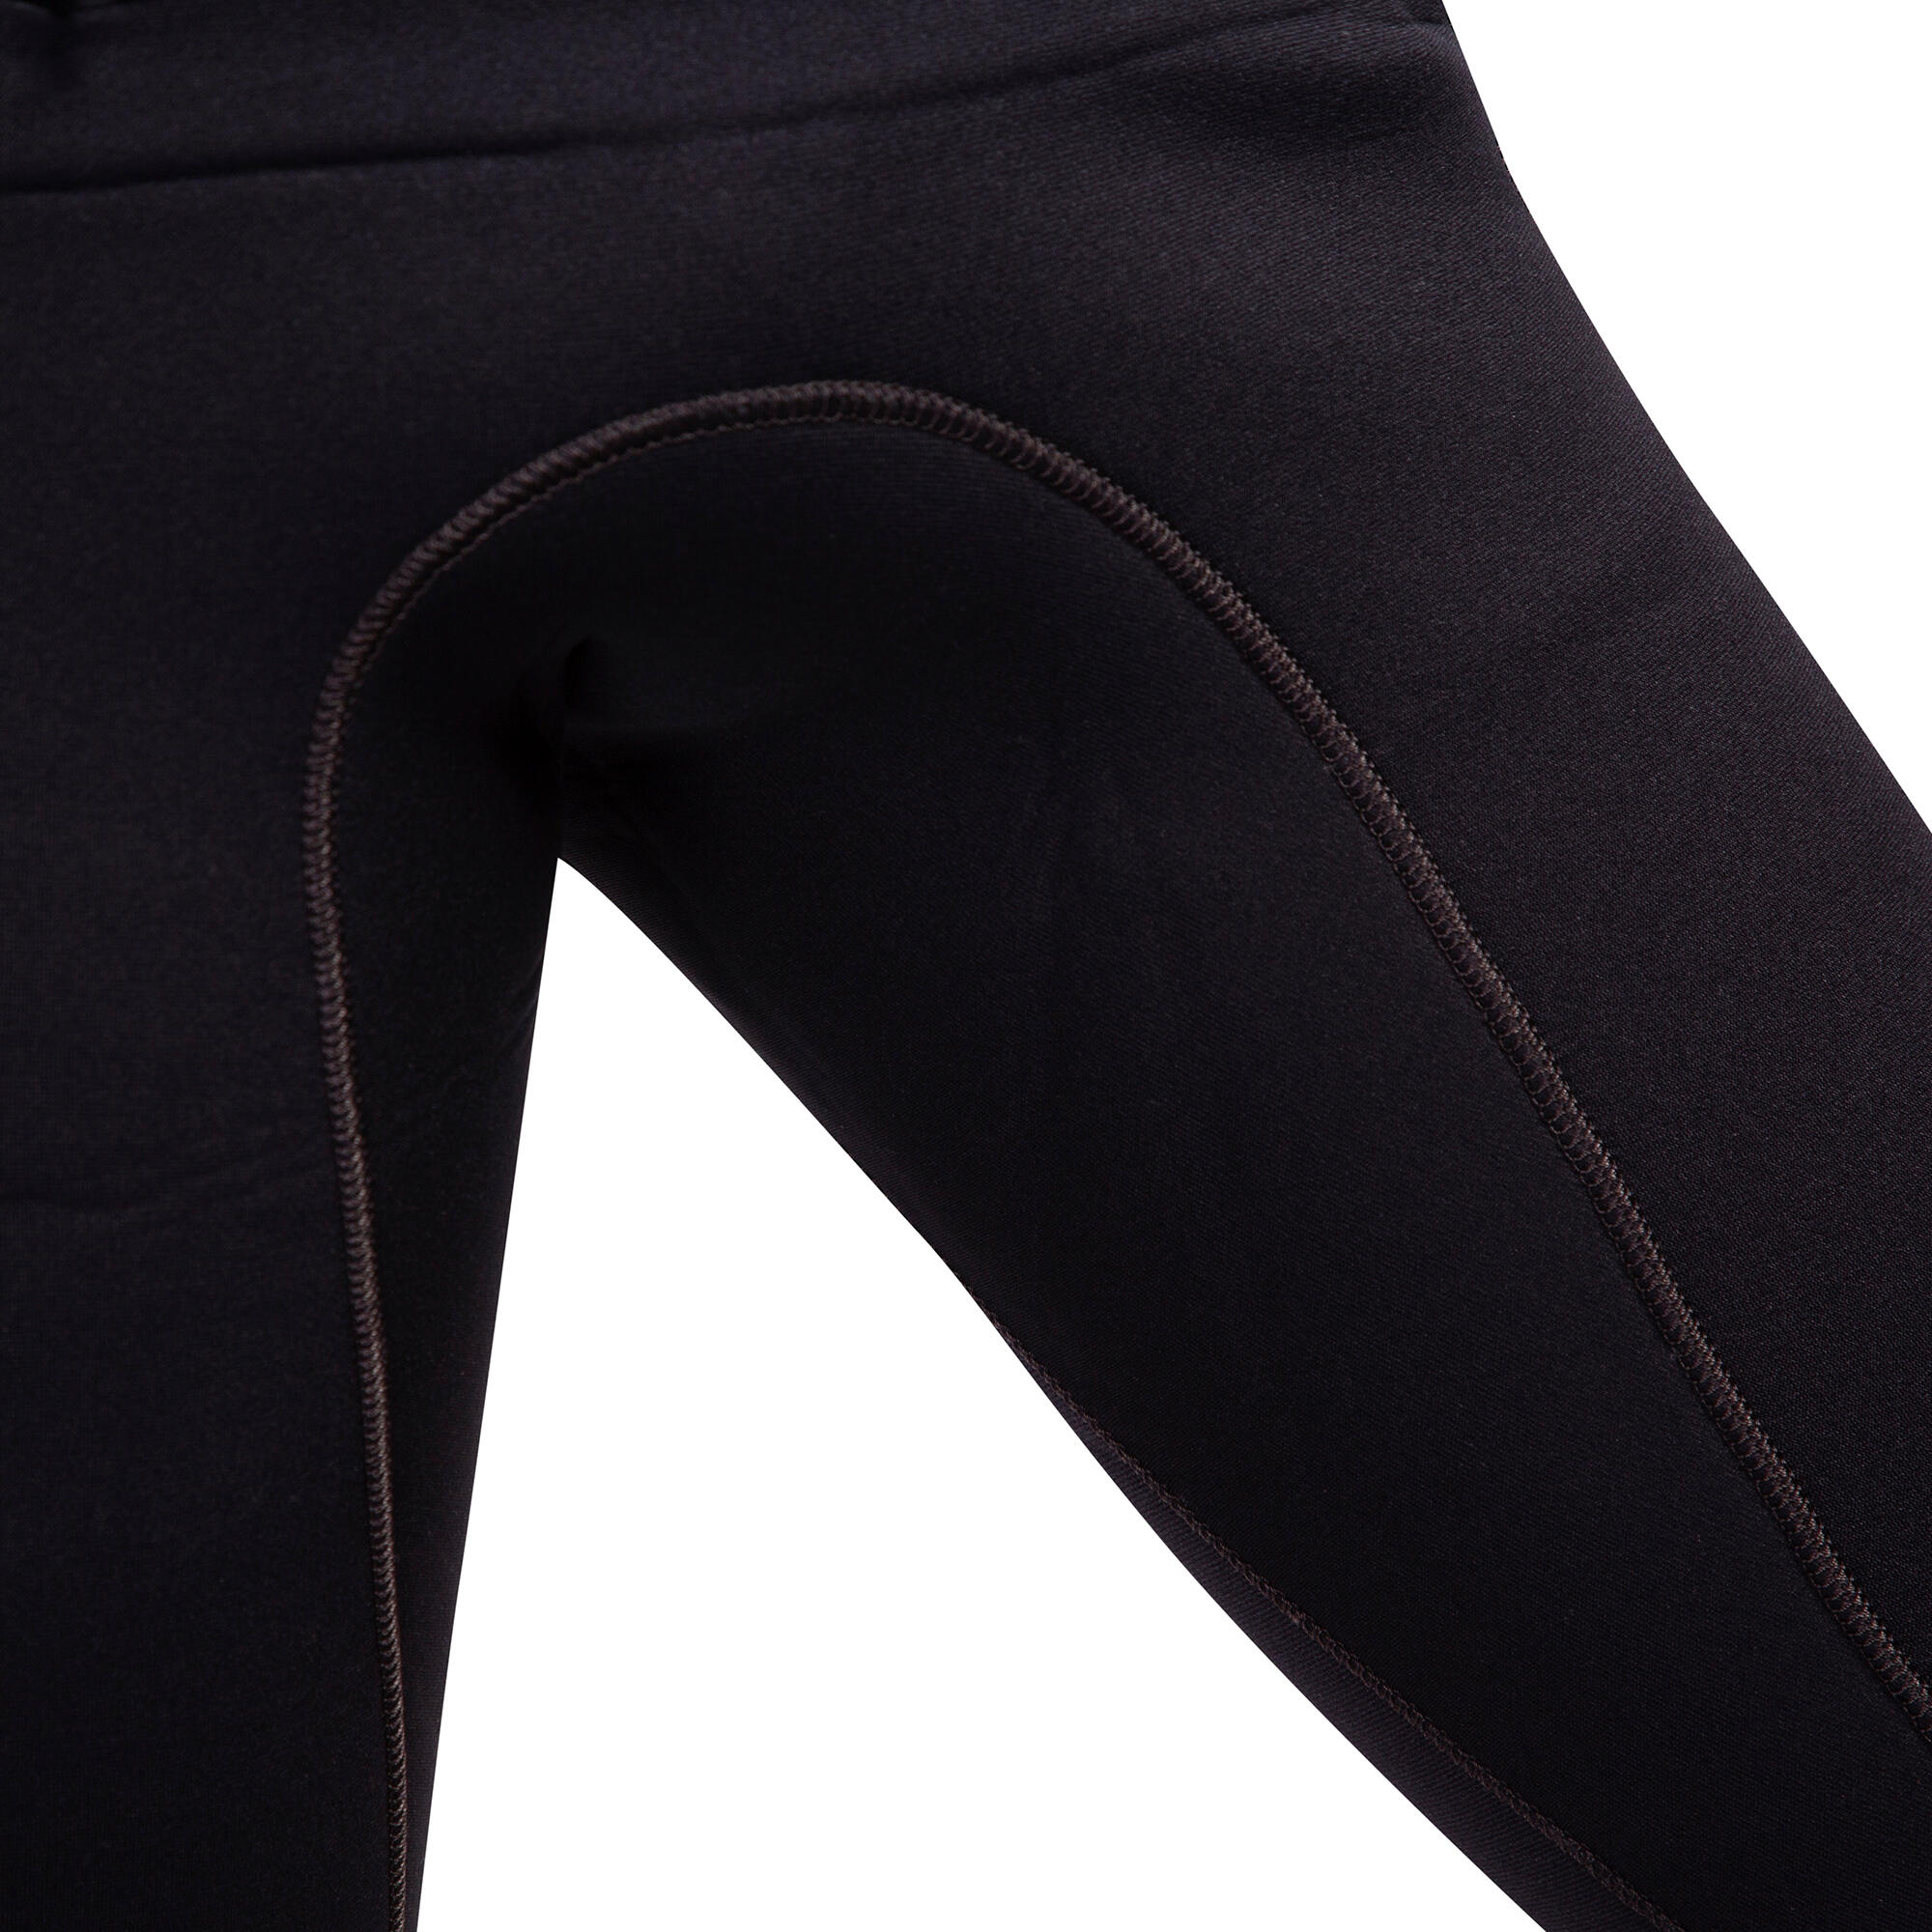 Men's Canyoning Wetsuit Trousers 5 mm - MK 500 14/19